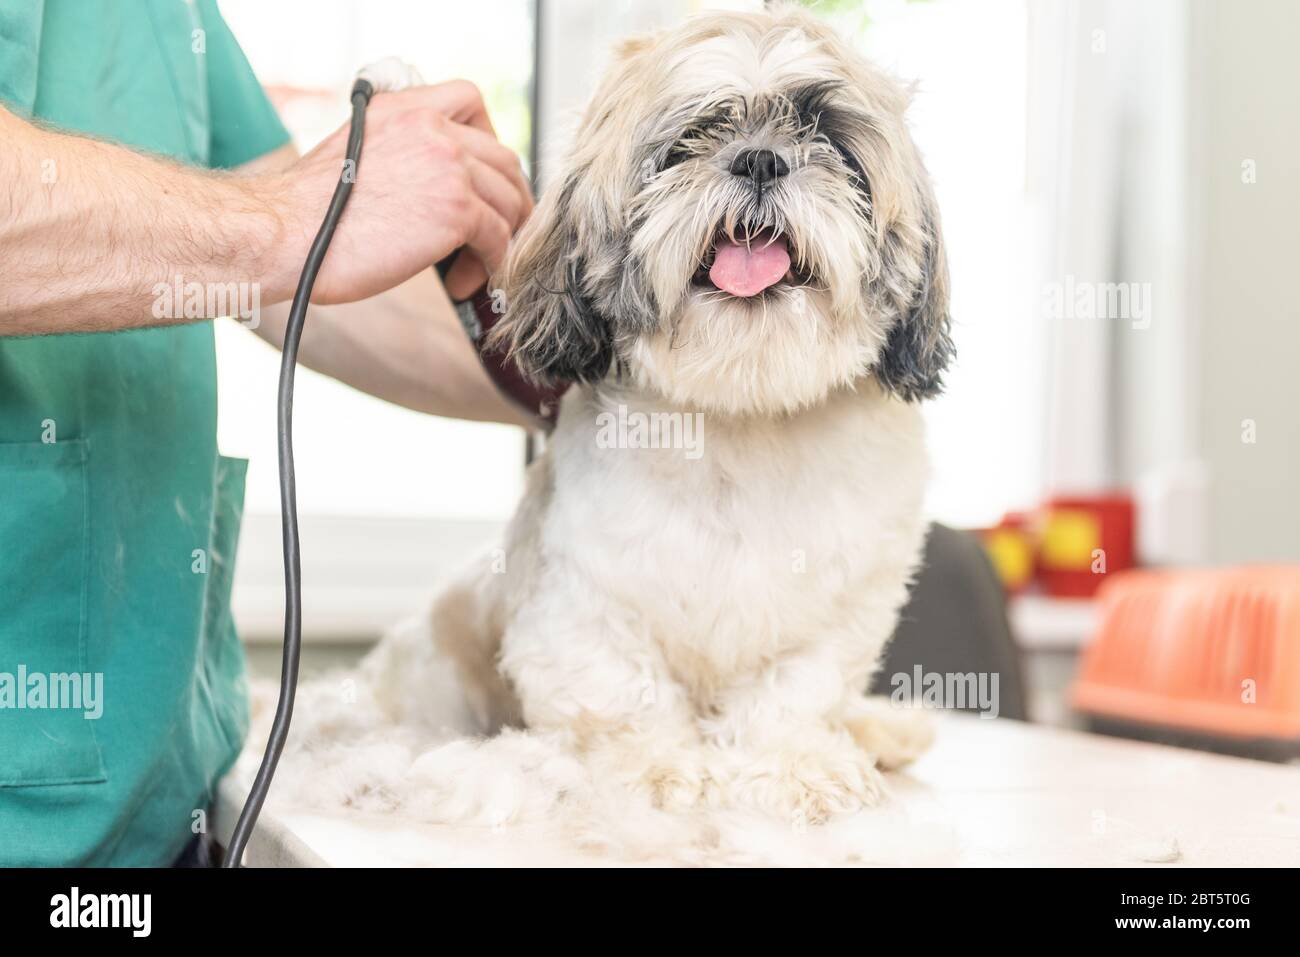 Professional groomer is trimming small dog by electric razor. White dog is looking to the camera. Stock Photo